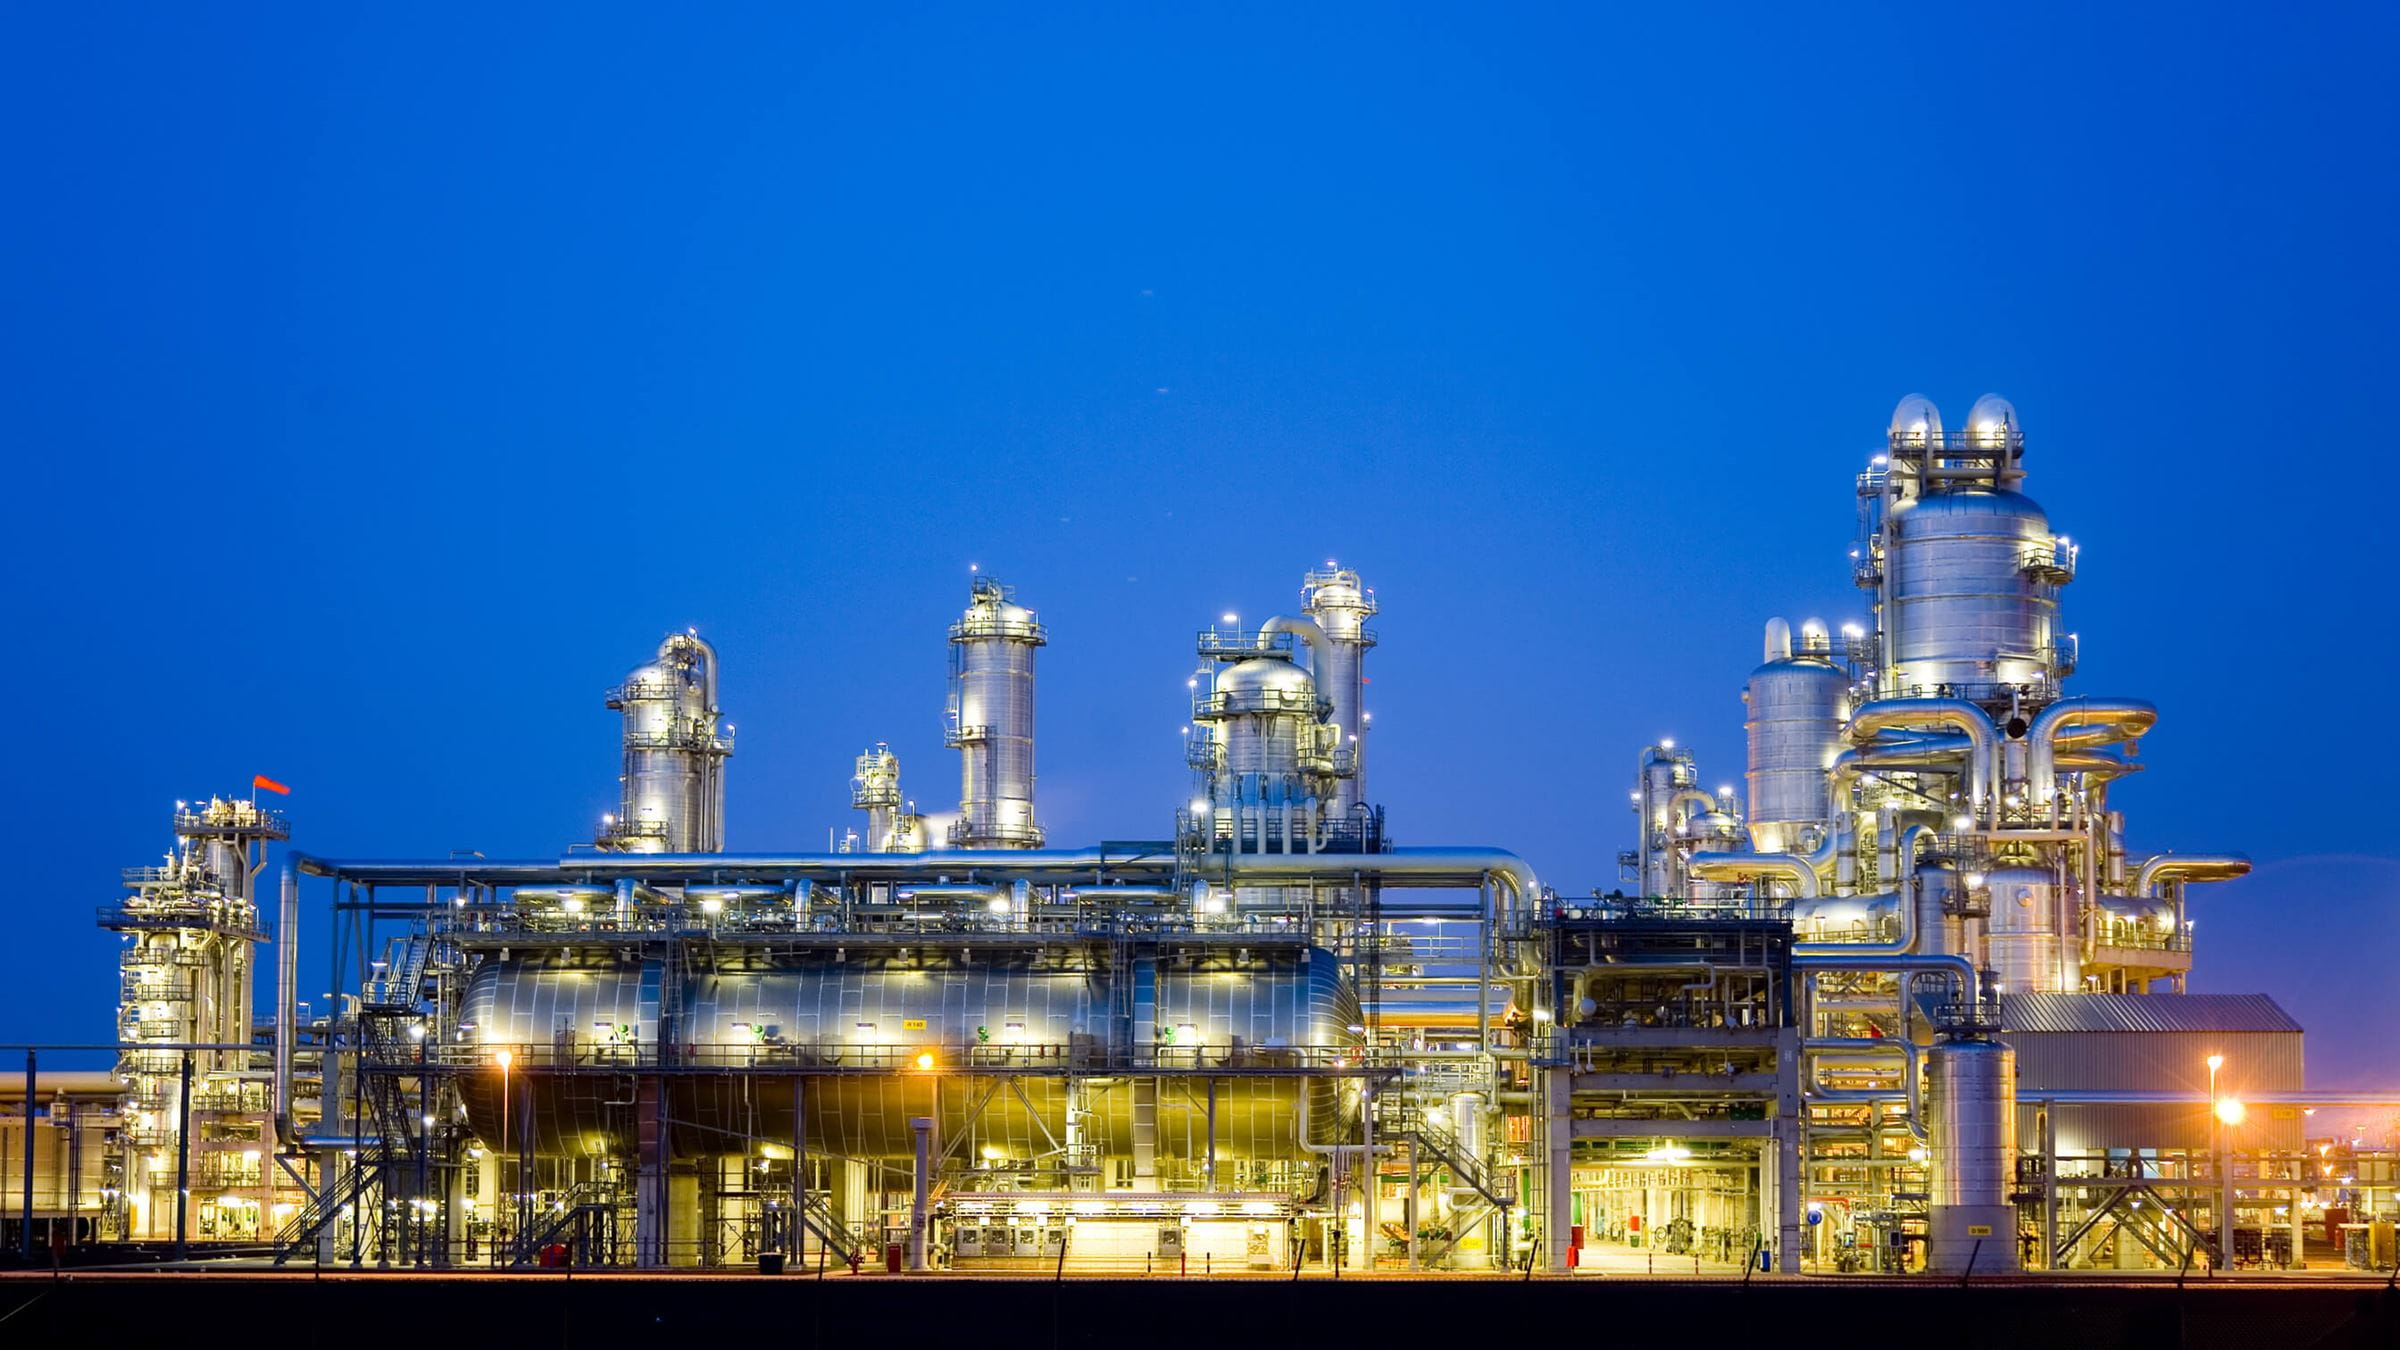 Petrochemical refinery lit up at night